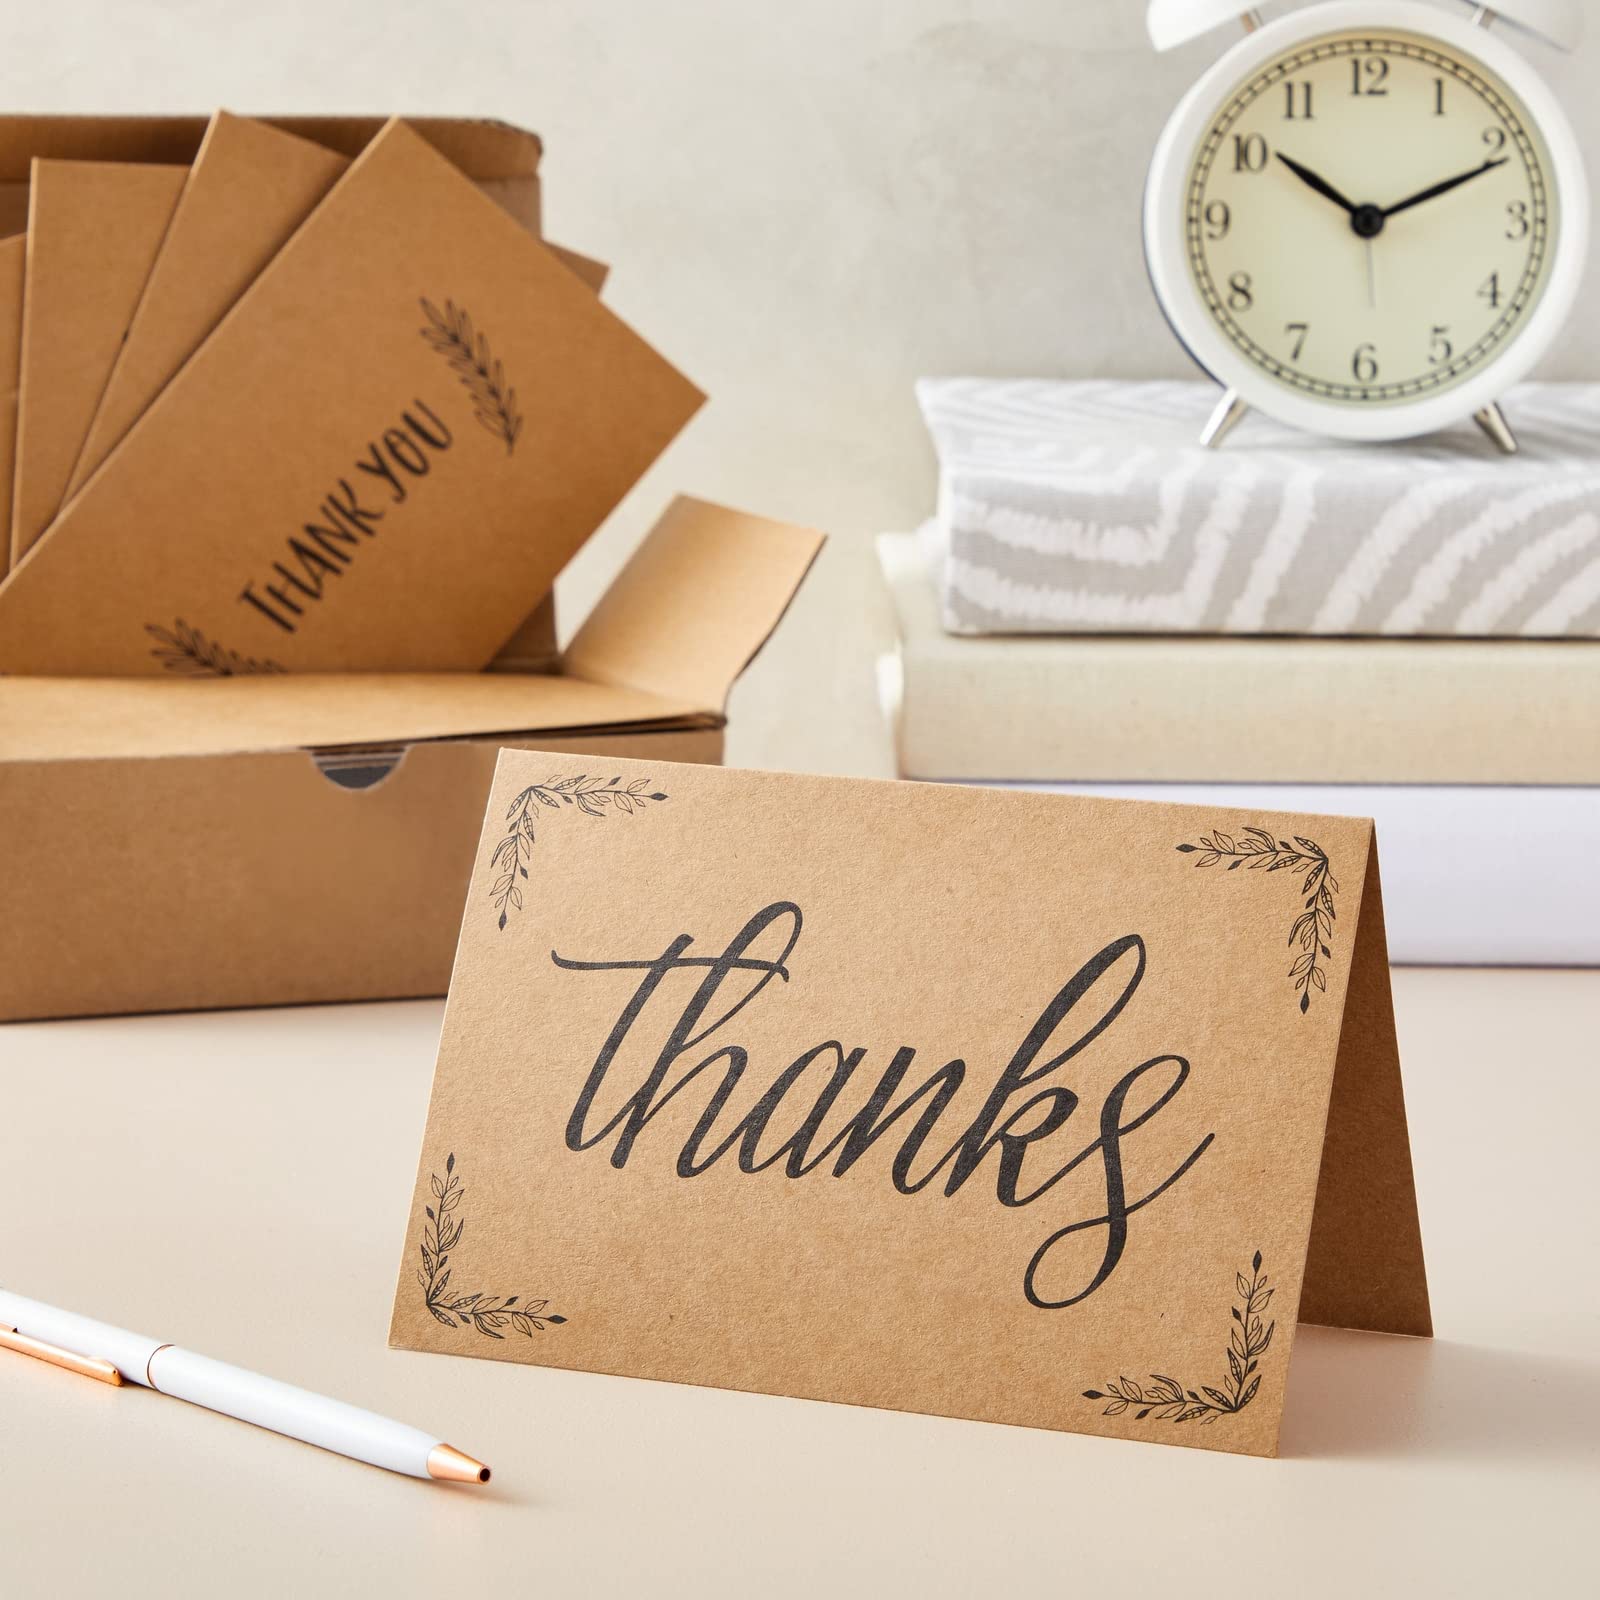 Thank You Cards - 36-Count Thank You Notes, Kraft Paper Bulk Thank You Cards Set - Blank on The Inside, Handwritten Style, Includes Thank You Cards and Envelopes, 4 x 6 inches